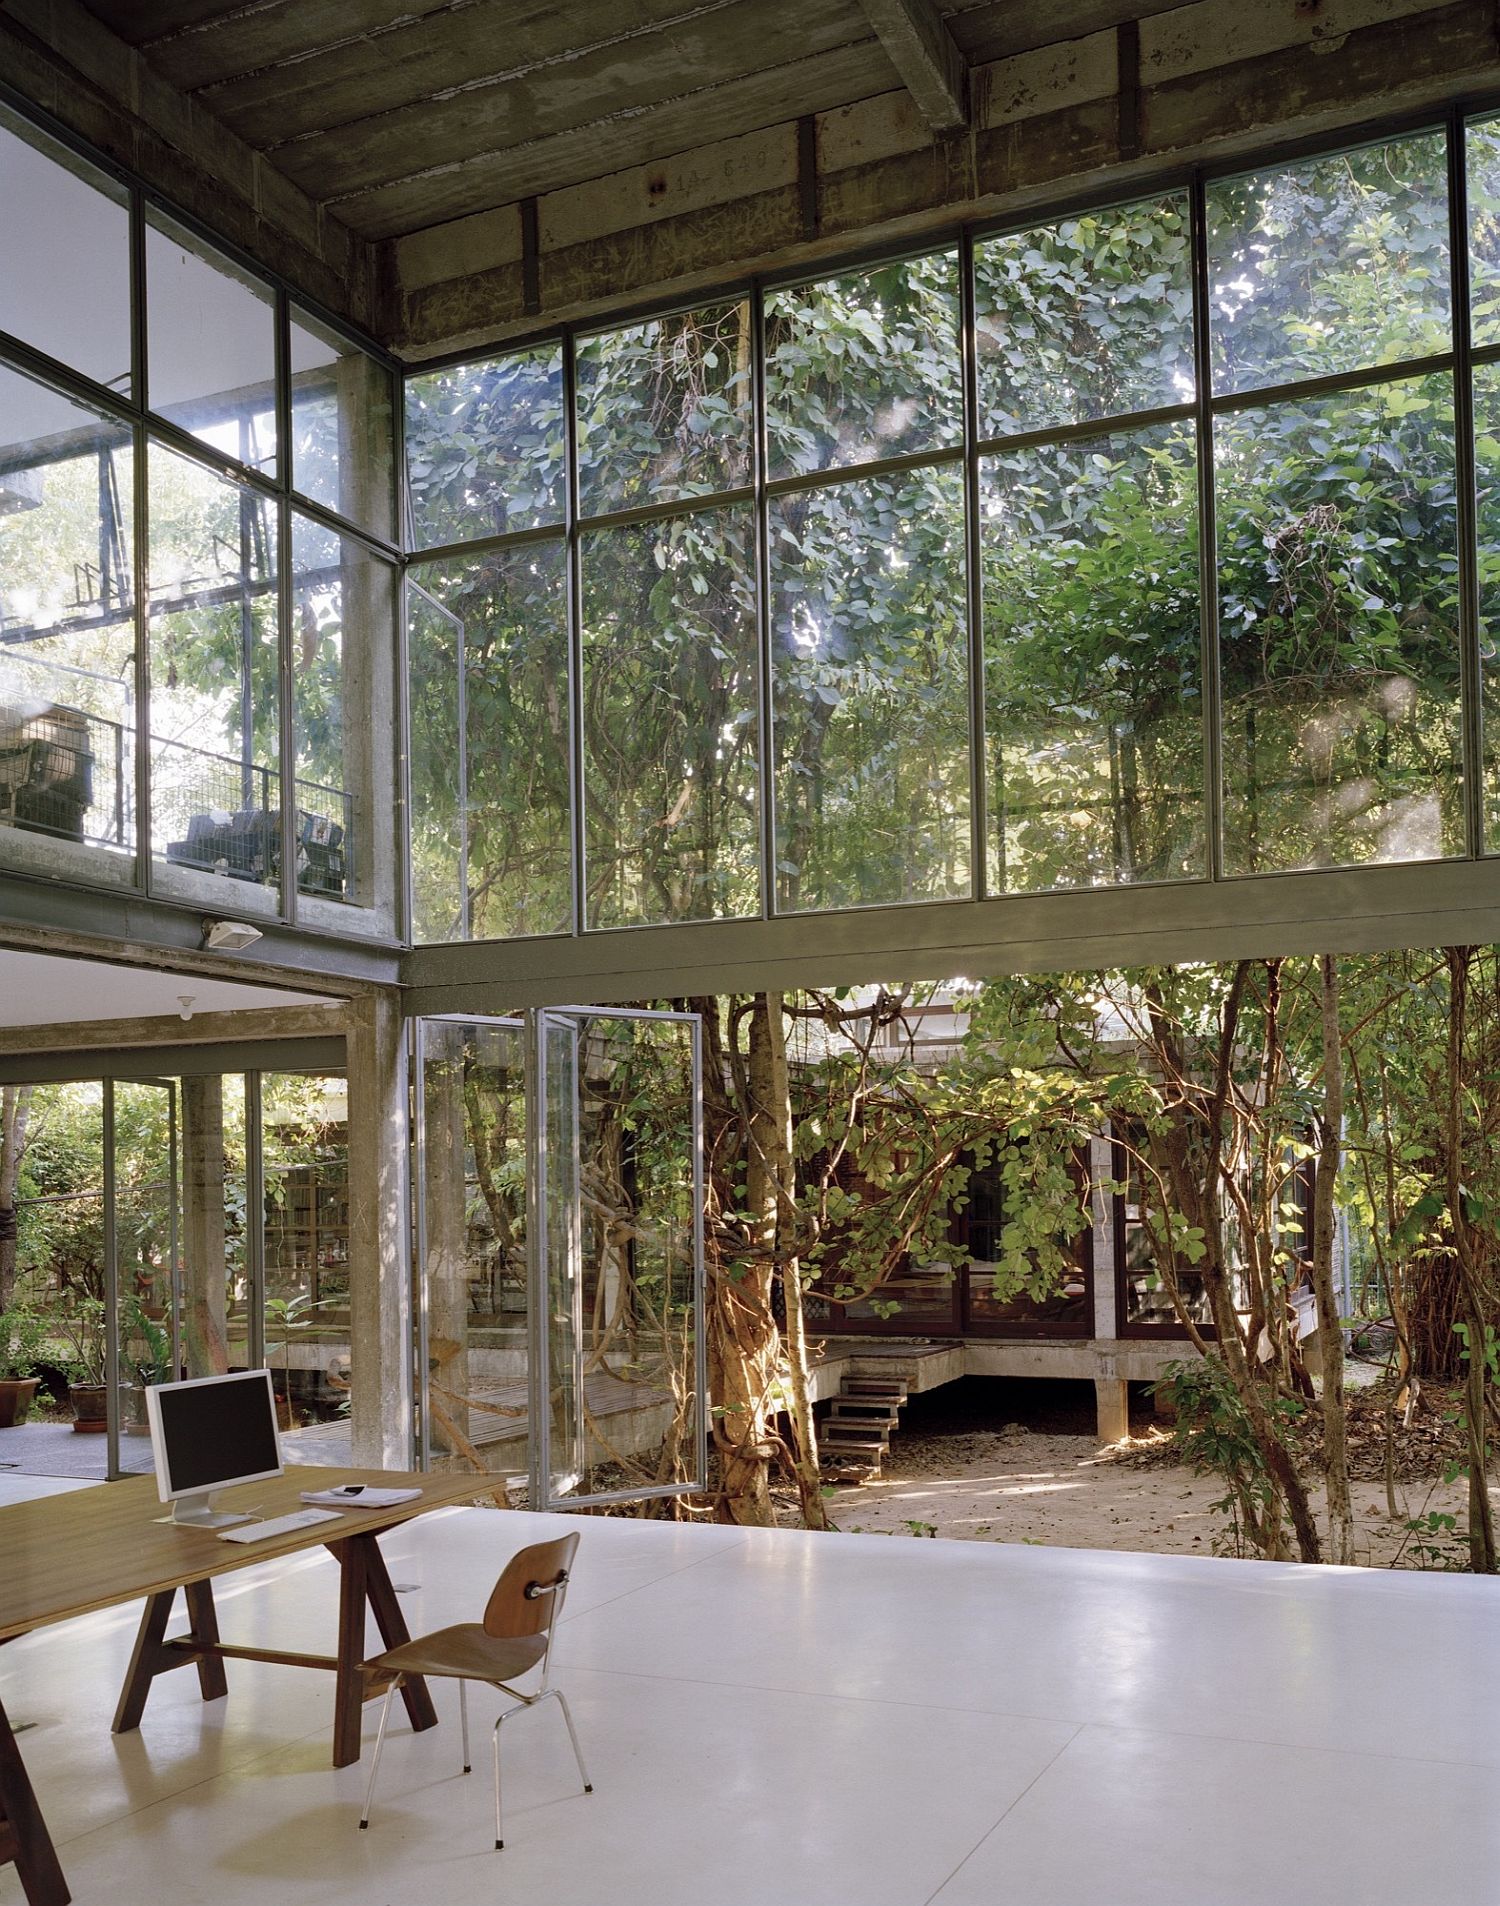 Studio and kids' play area of the home in Thailand with double height ceiling and sweeping glass windows